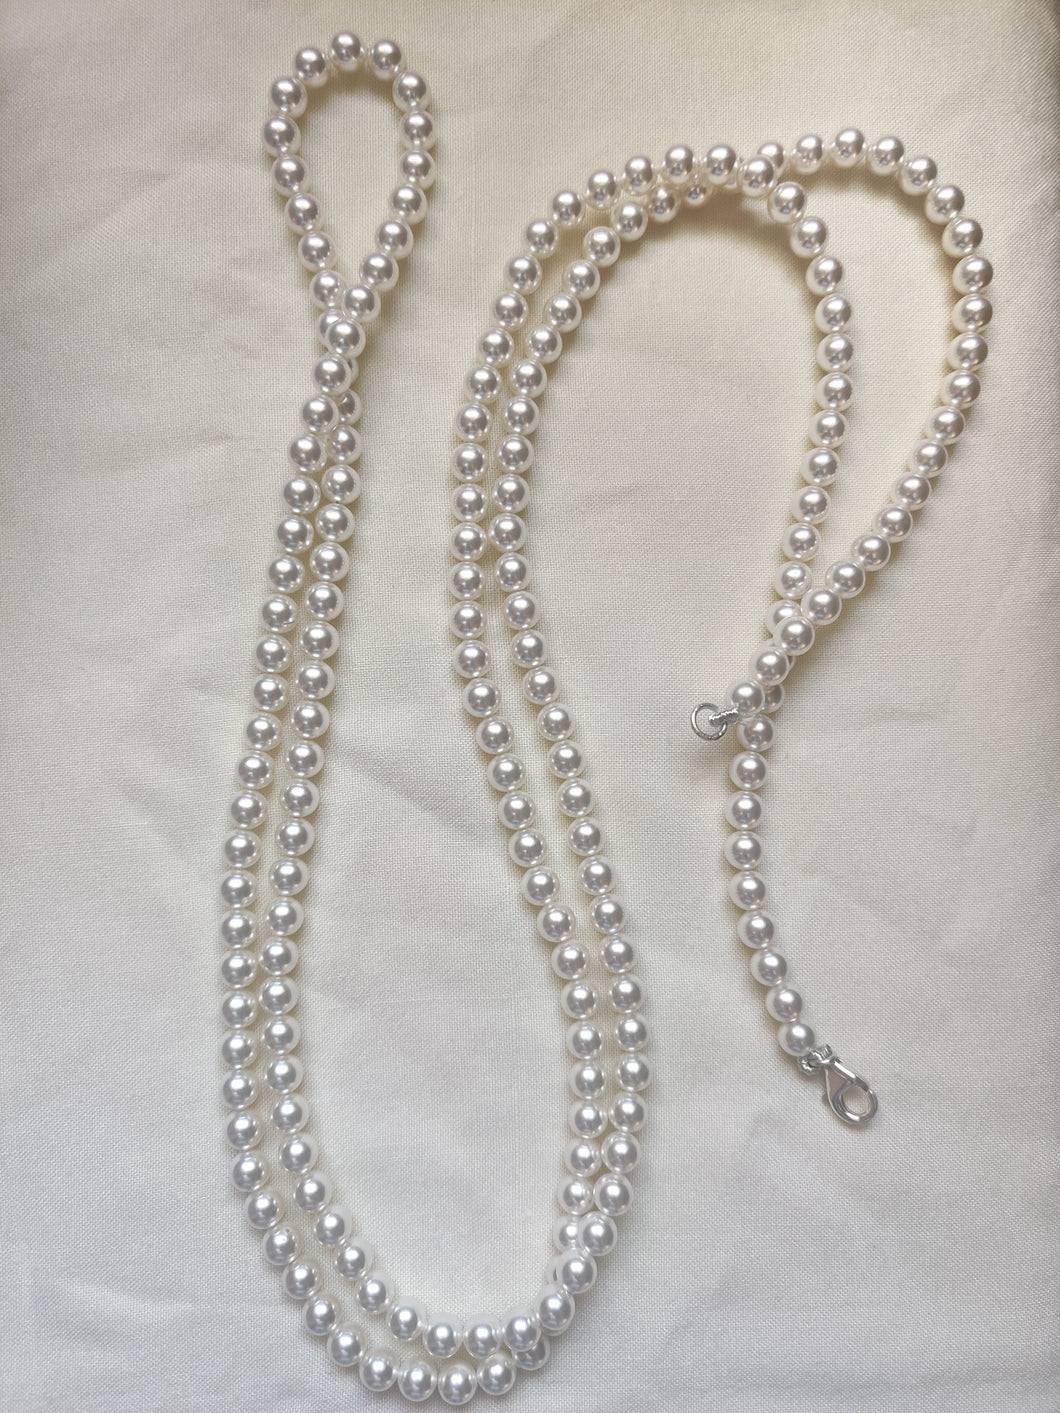 Dewdrops Long Pearl Necklace